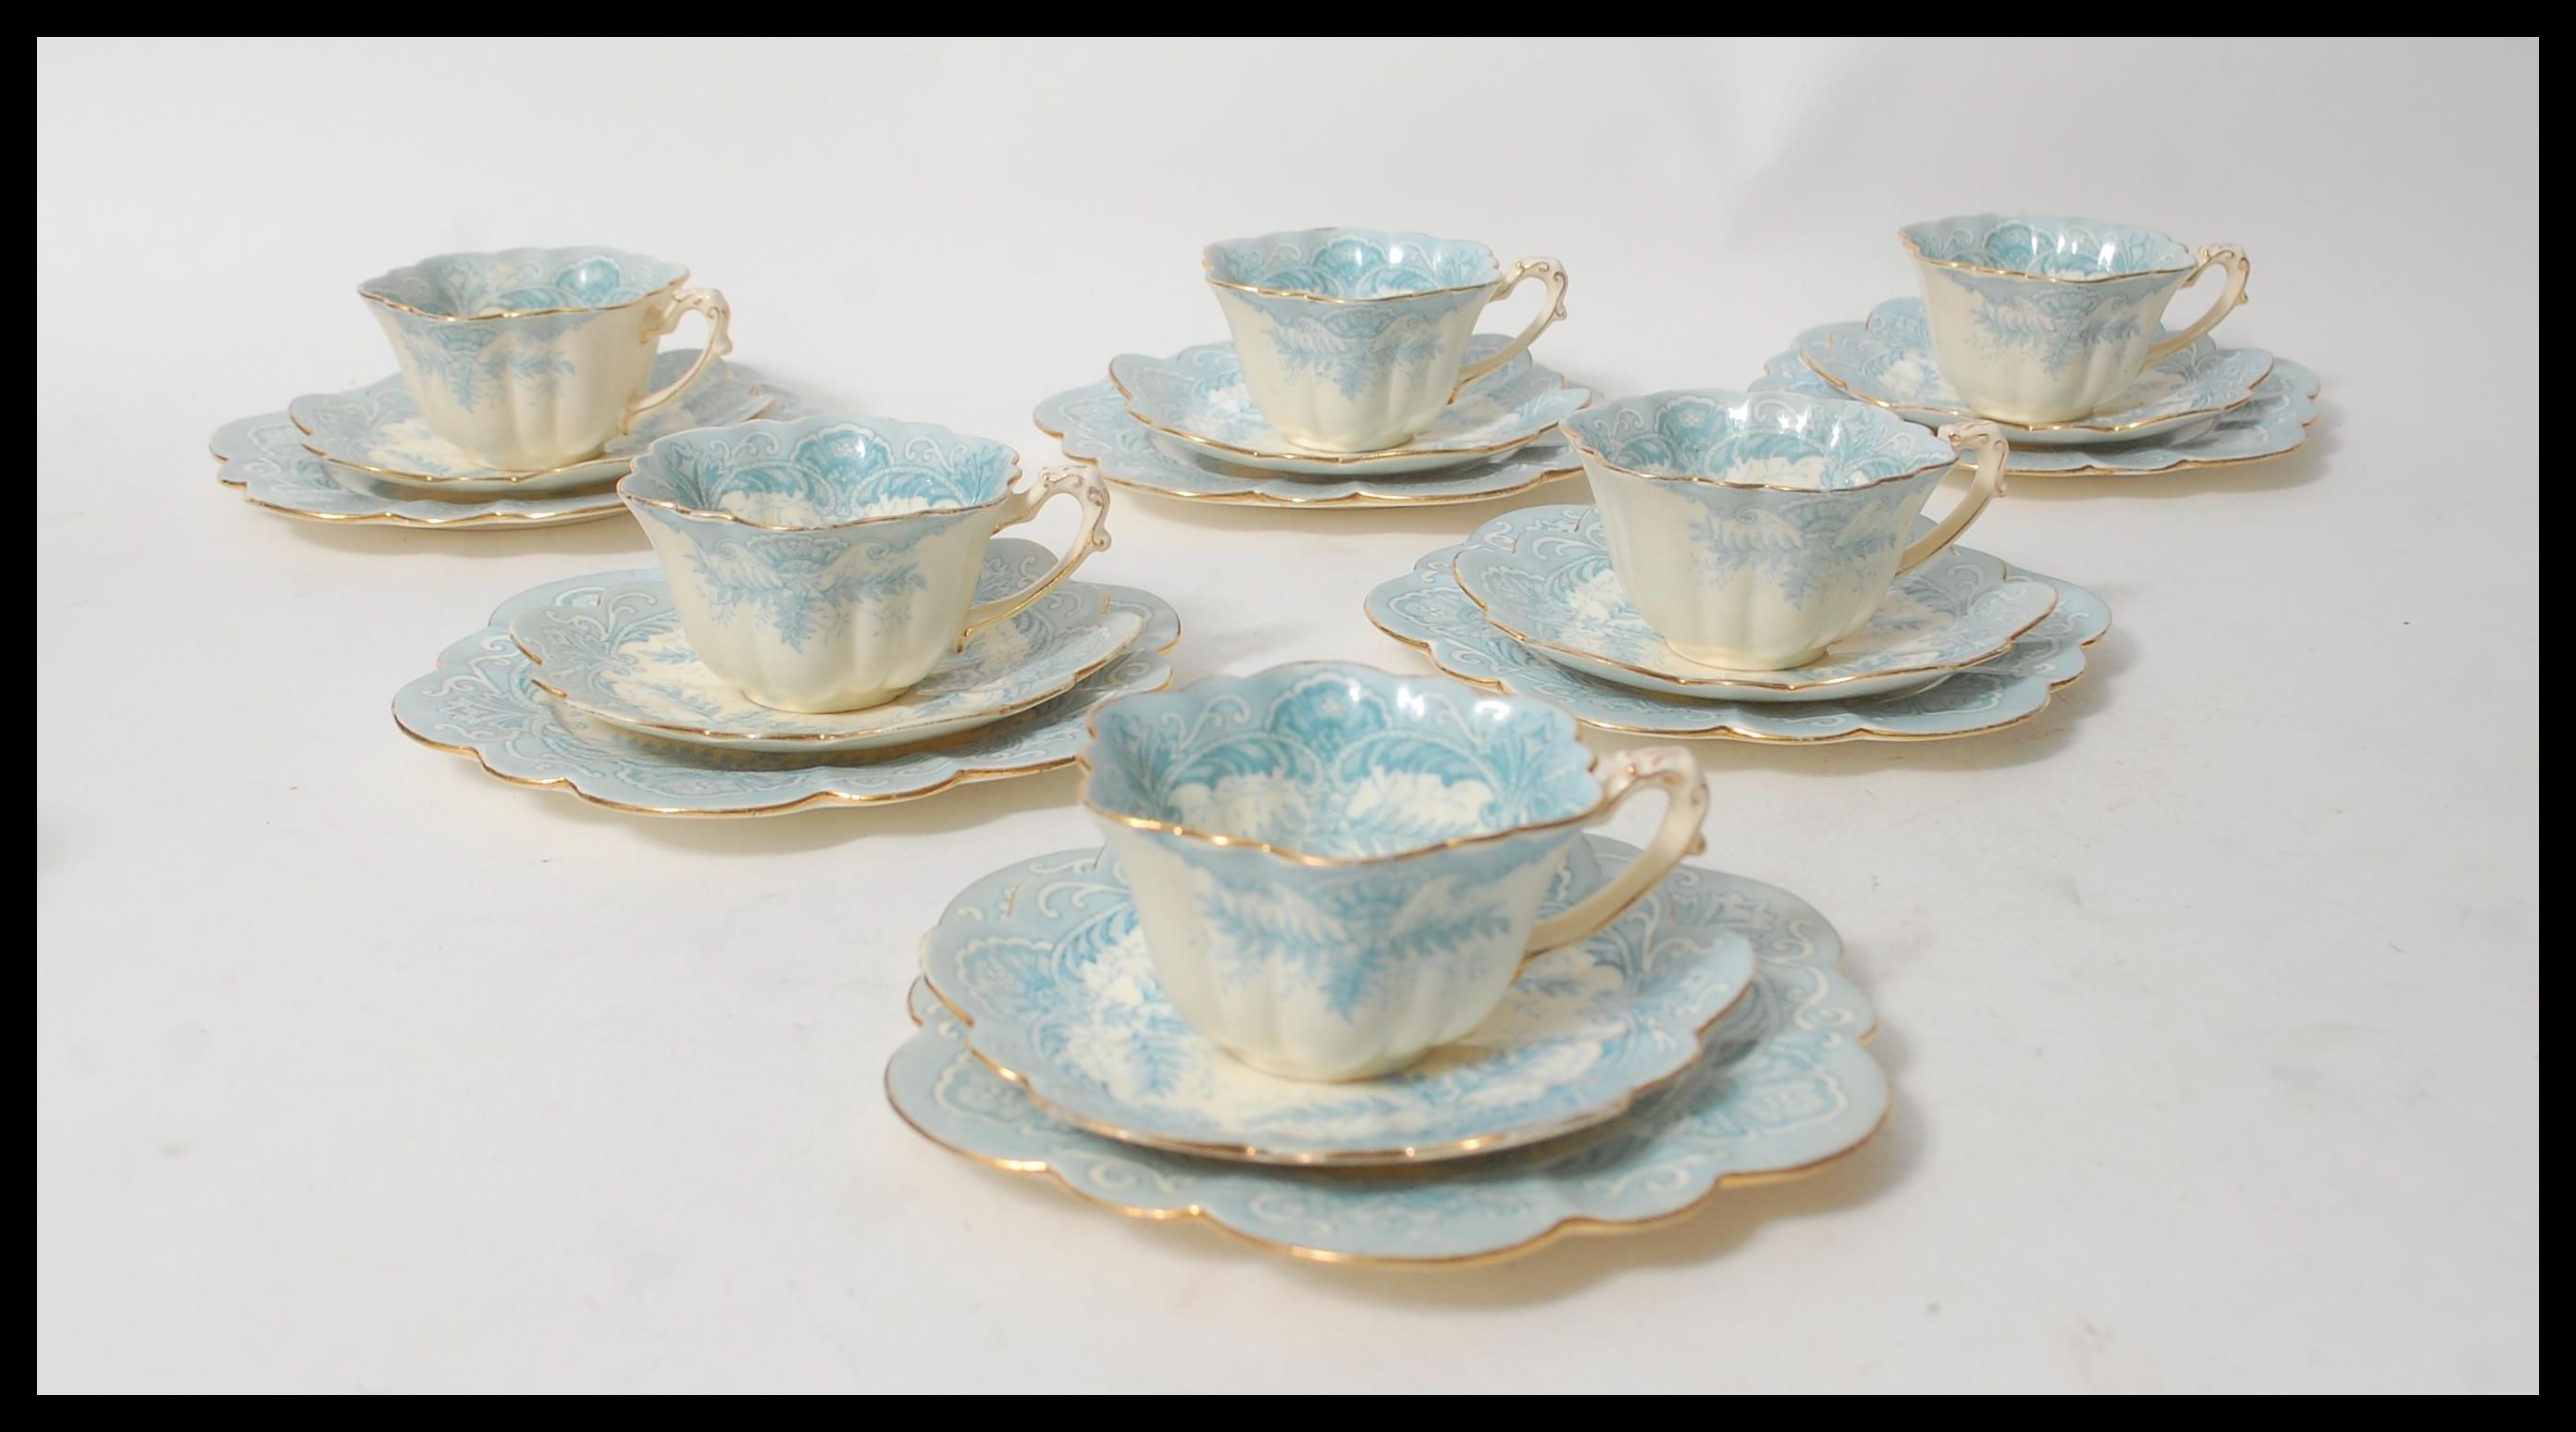 A 19th century Victorian Foley tea service transfer printed in the fern pattern in blue having - Image 7 of 11